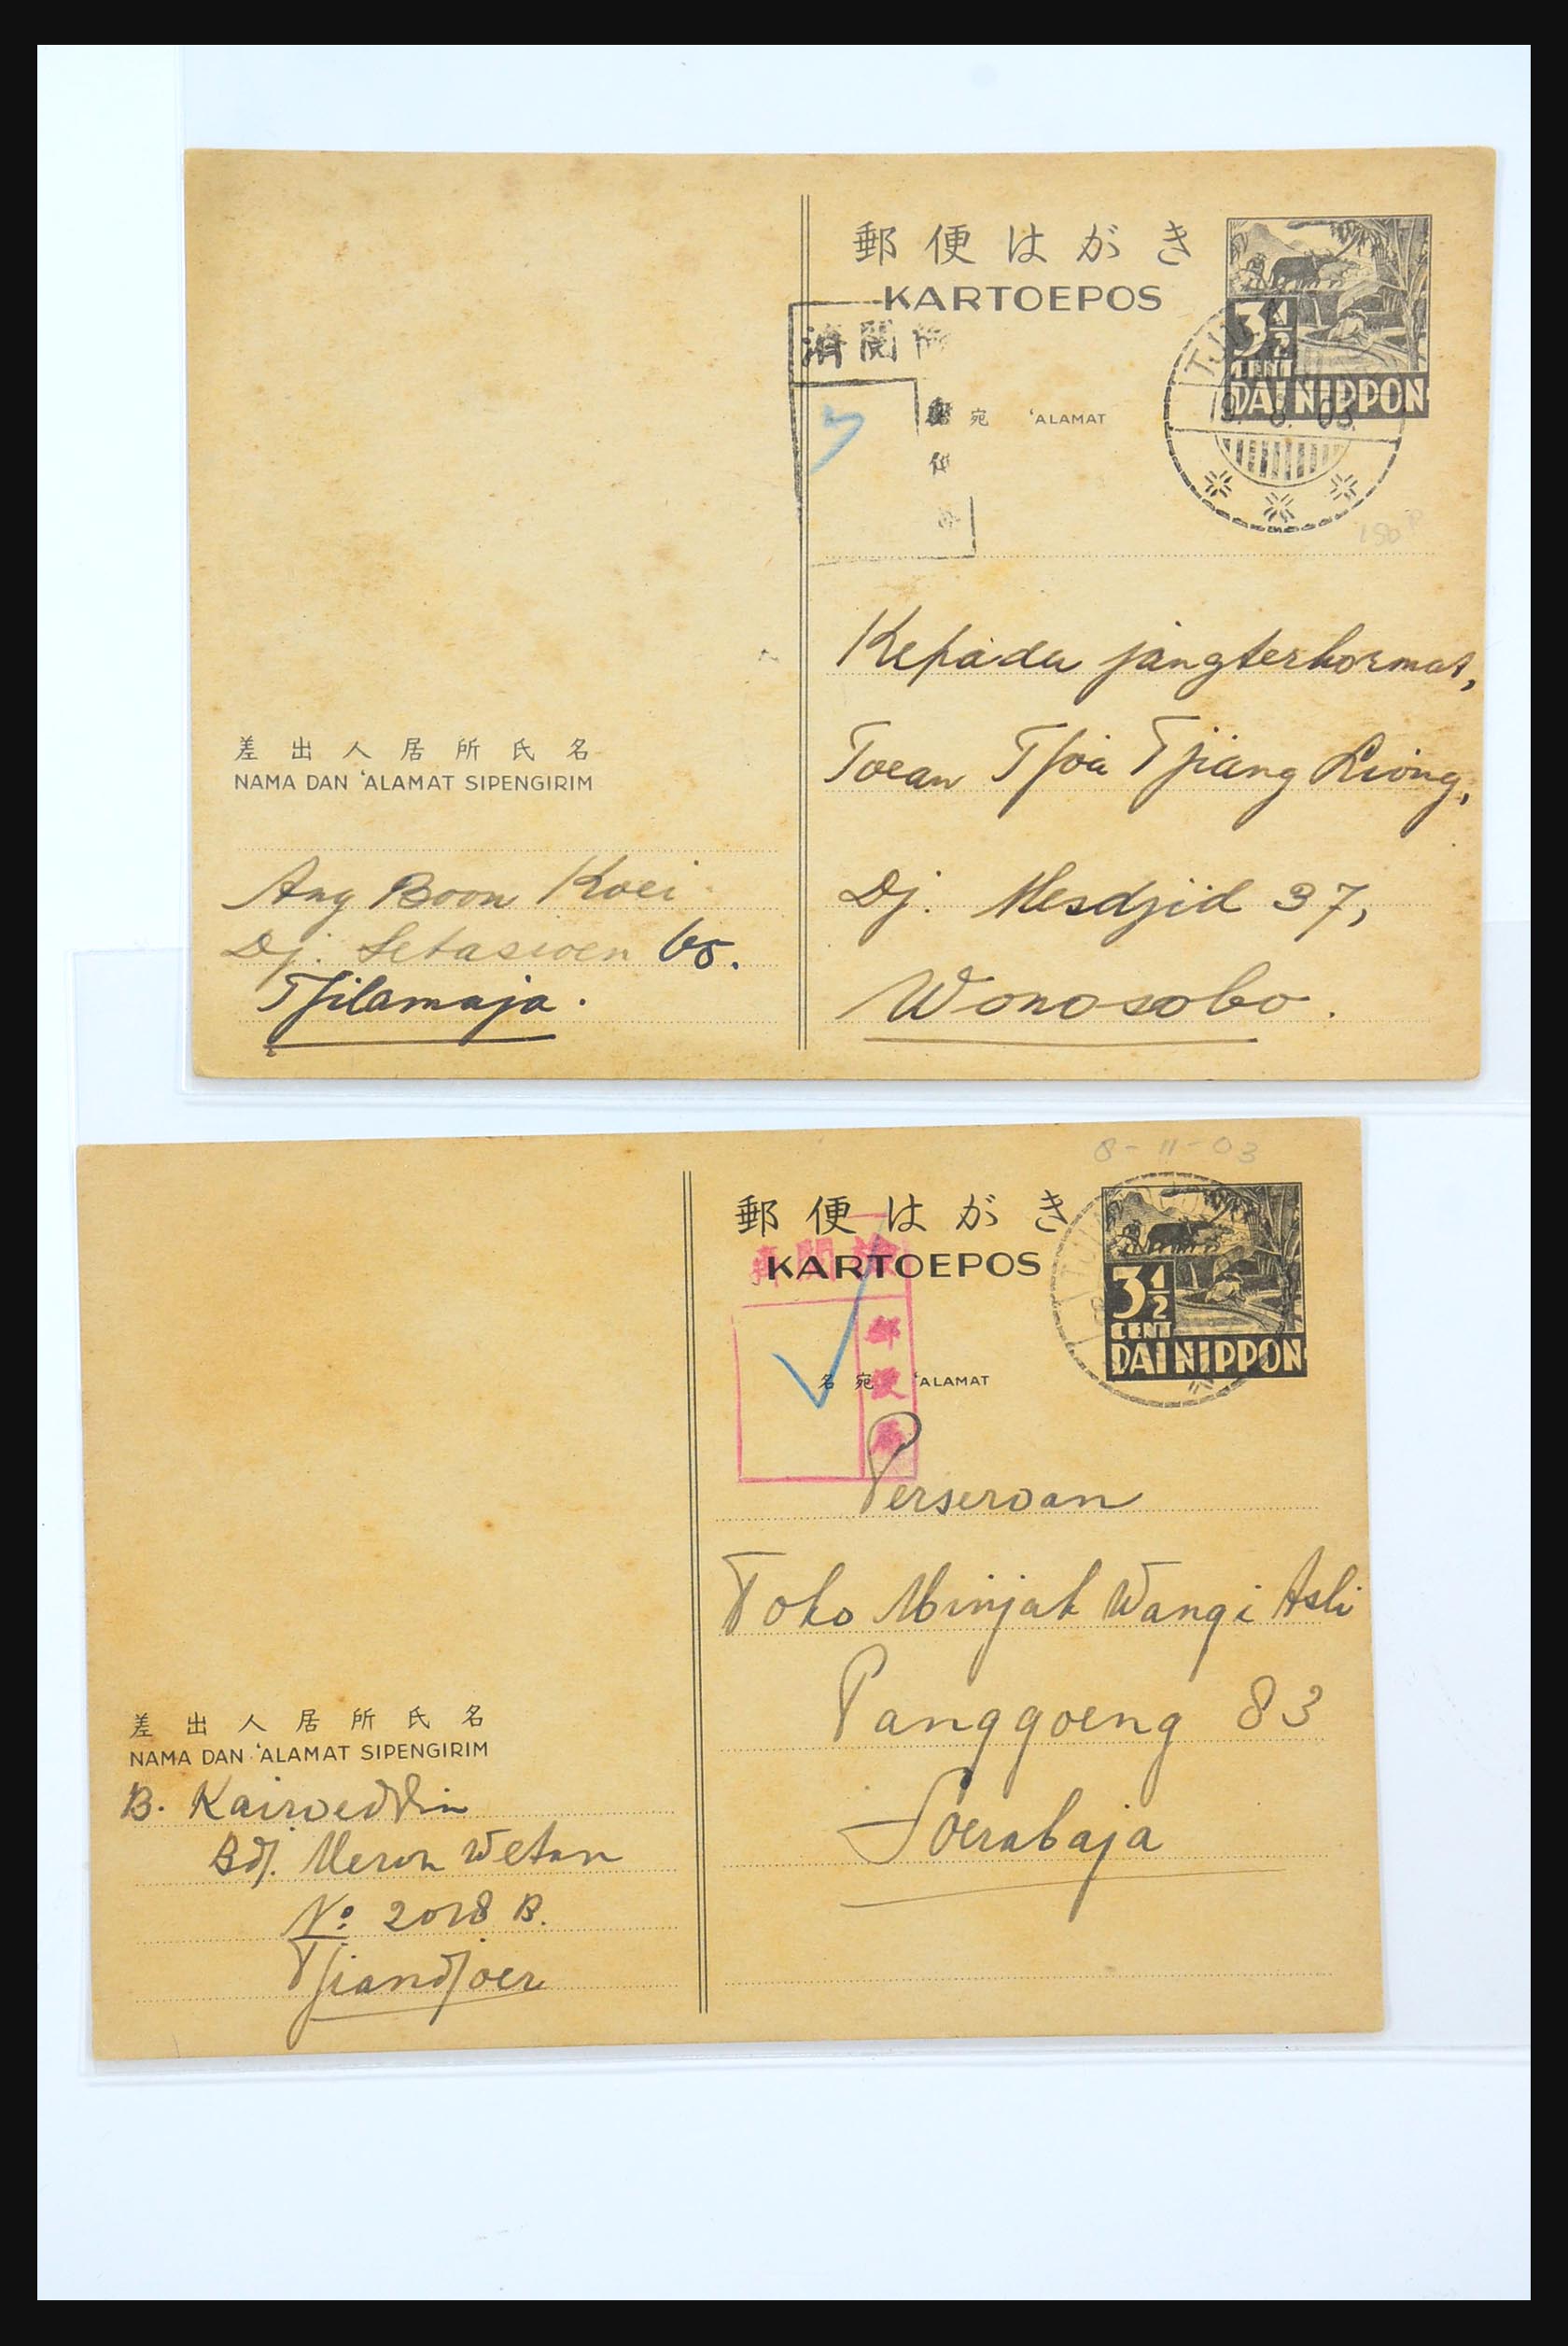 31362 101 - 31362 Netherlands Indies Japanese occupation covers 1942-1945.